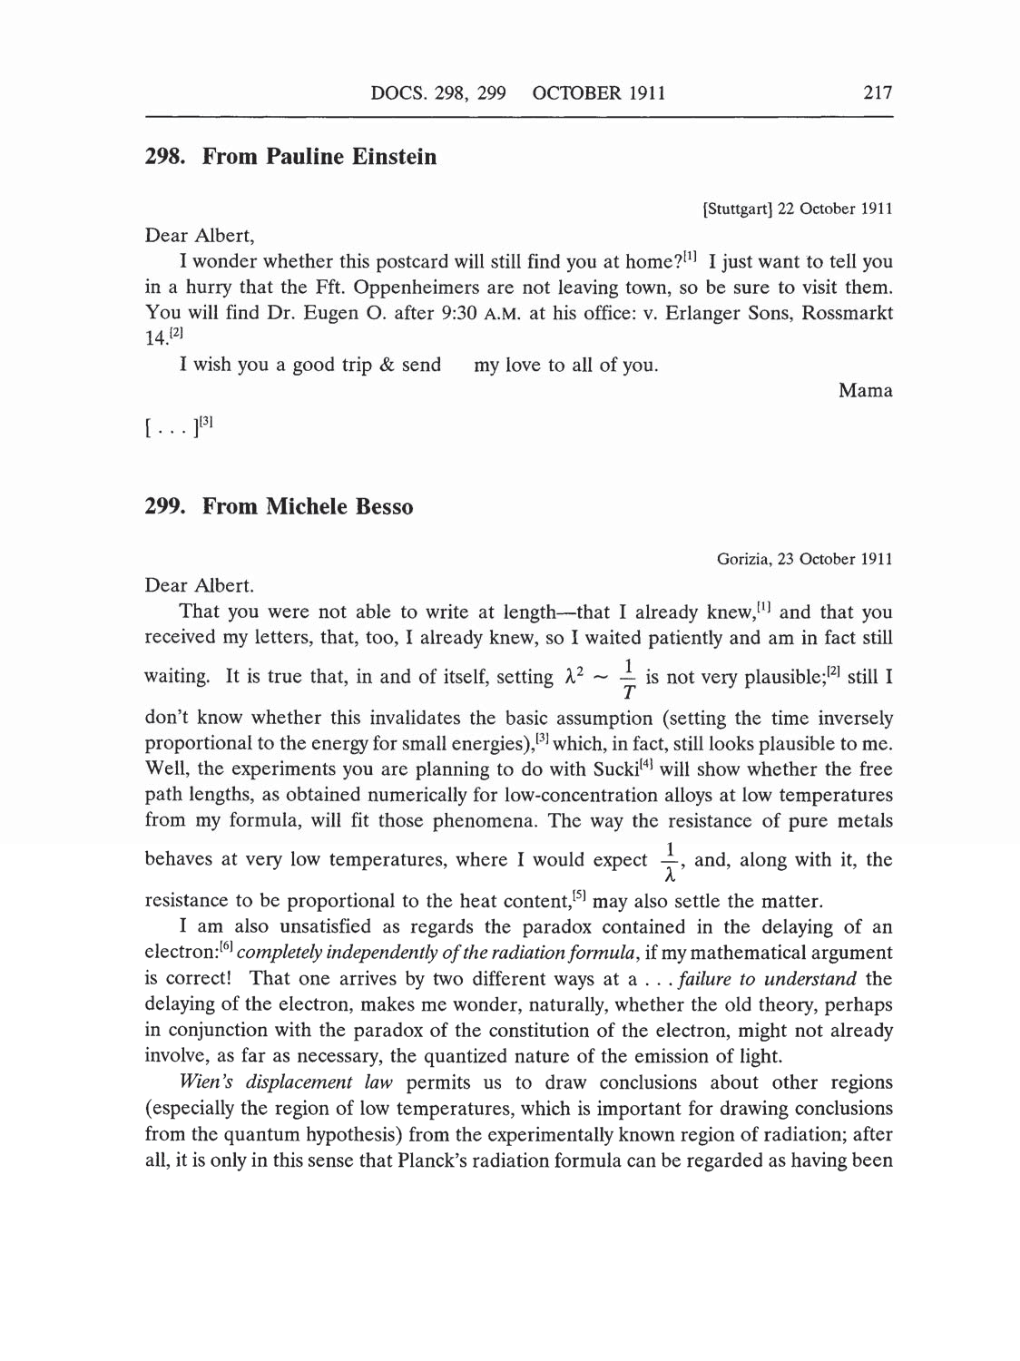 Volume 5: The Swiss Years: Correspondence, 1902-1914 (English translation supplement) page 217